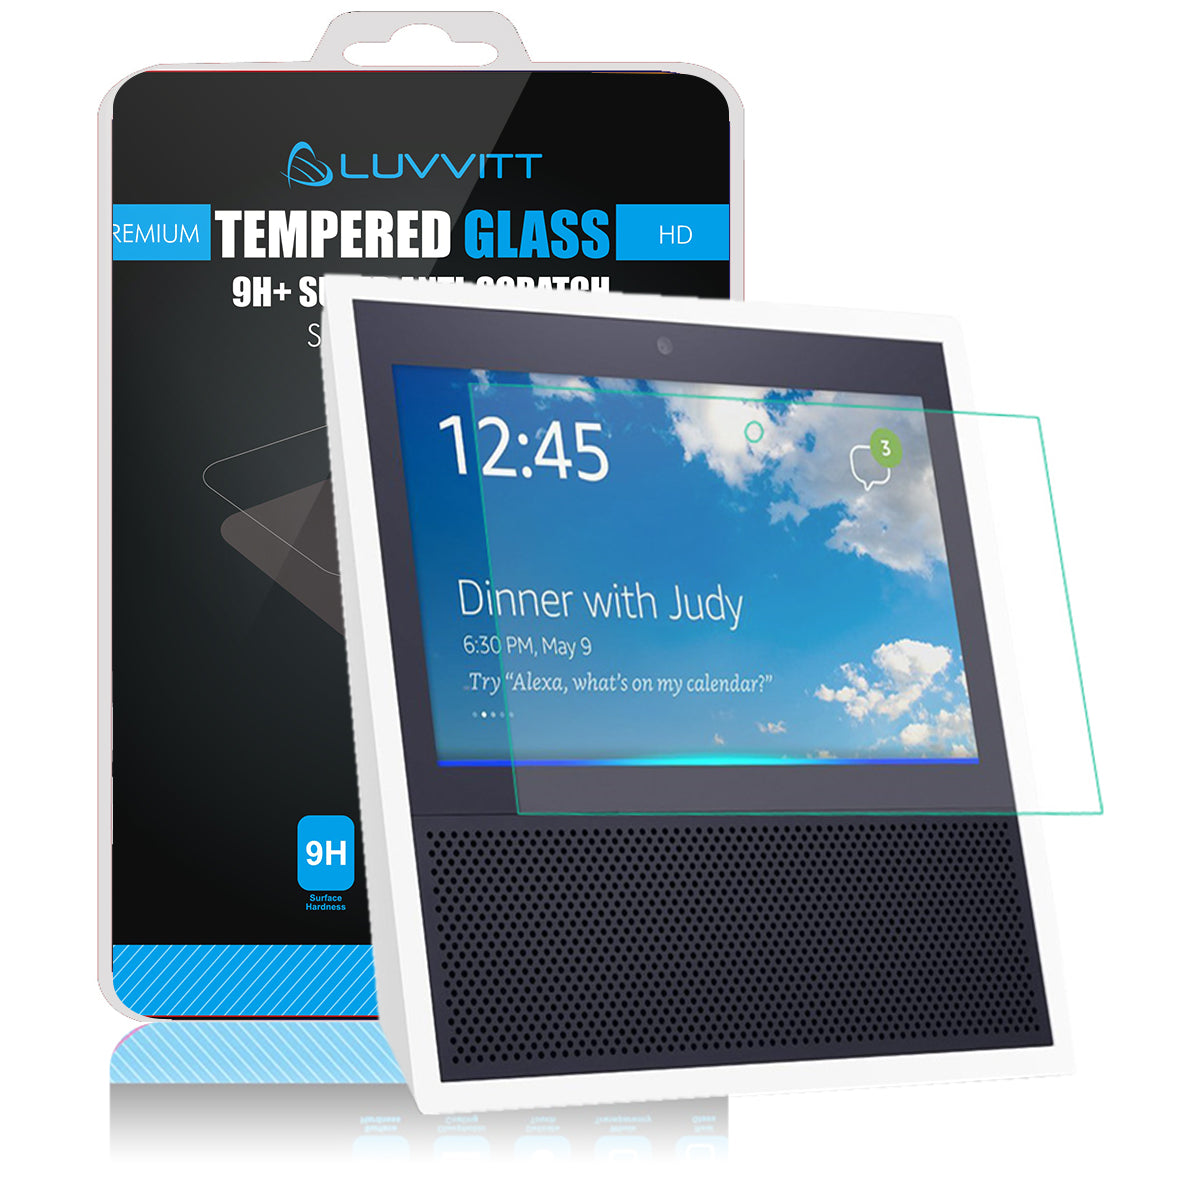 LUVVITT Tempered Glass for Amazon Echo Show - Clear